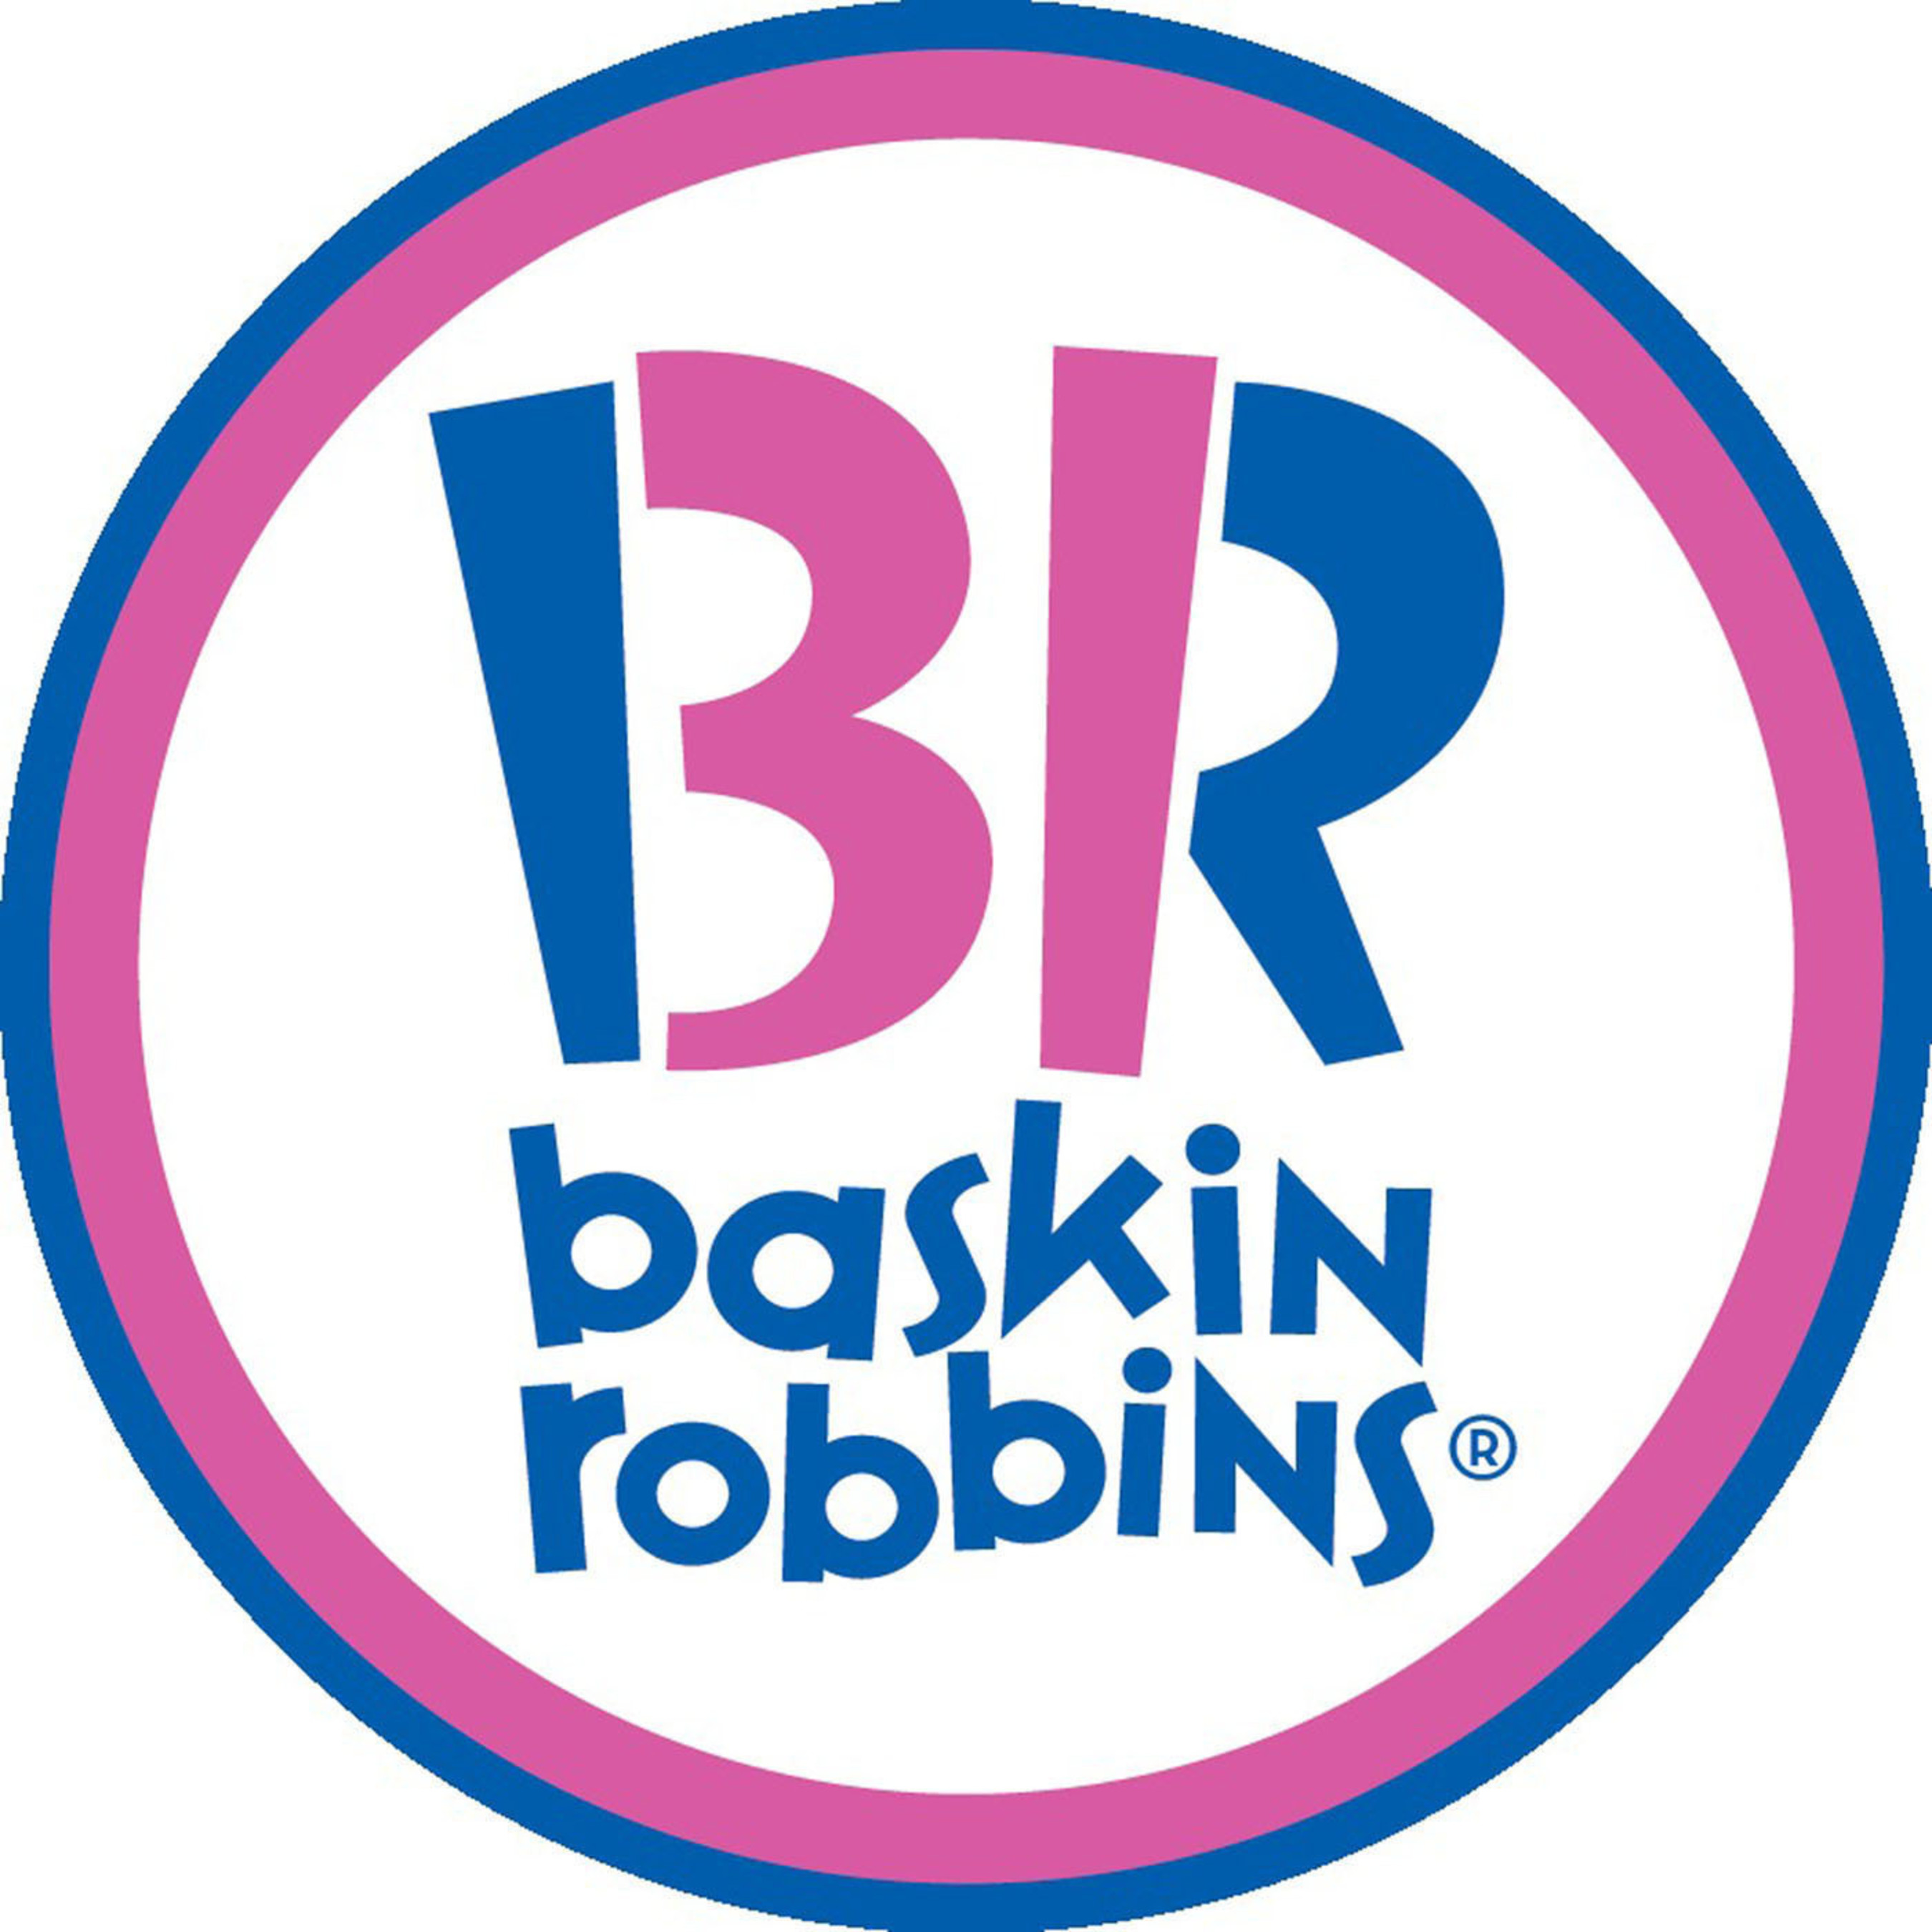 Baskin Robbins Launches New Mobile App Available For Iphone And Android Users